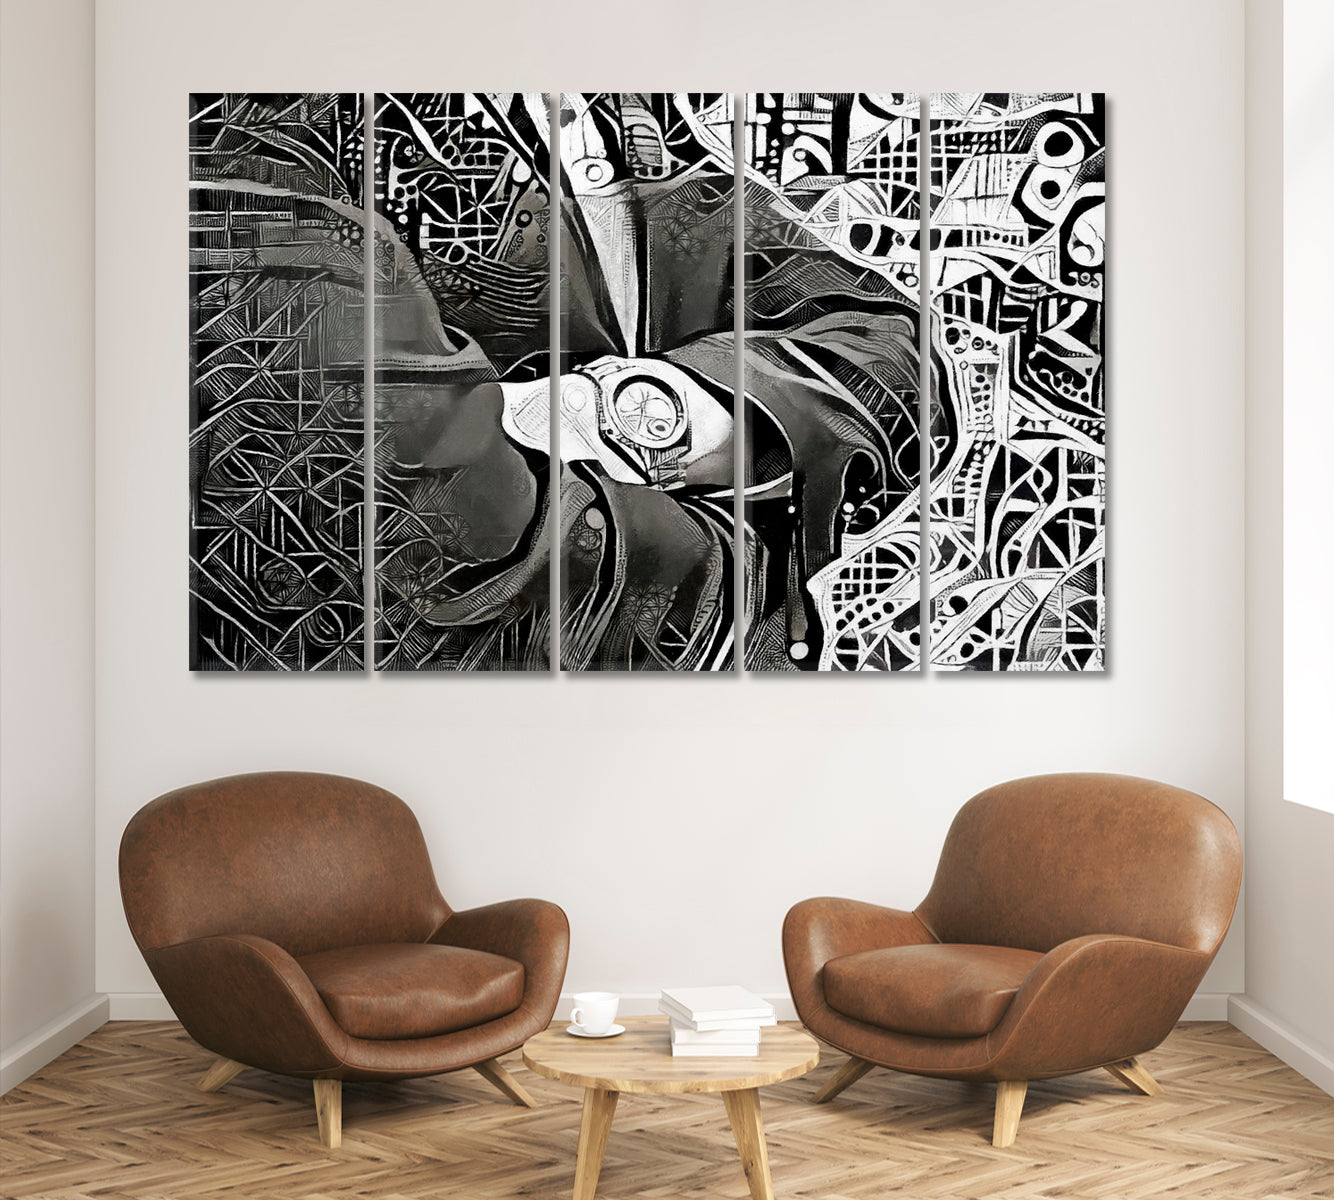 MAN WITH WATCH Abstract Geometric Modern Cubism Futurism Office Wall Art Canvas Print Artesty 5 panels 36" x 24" 